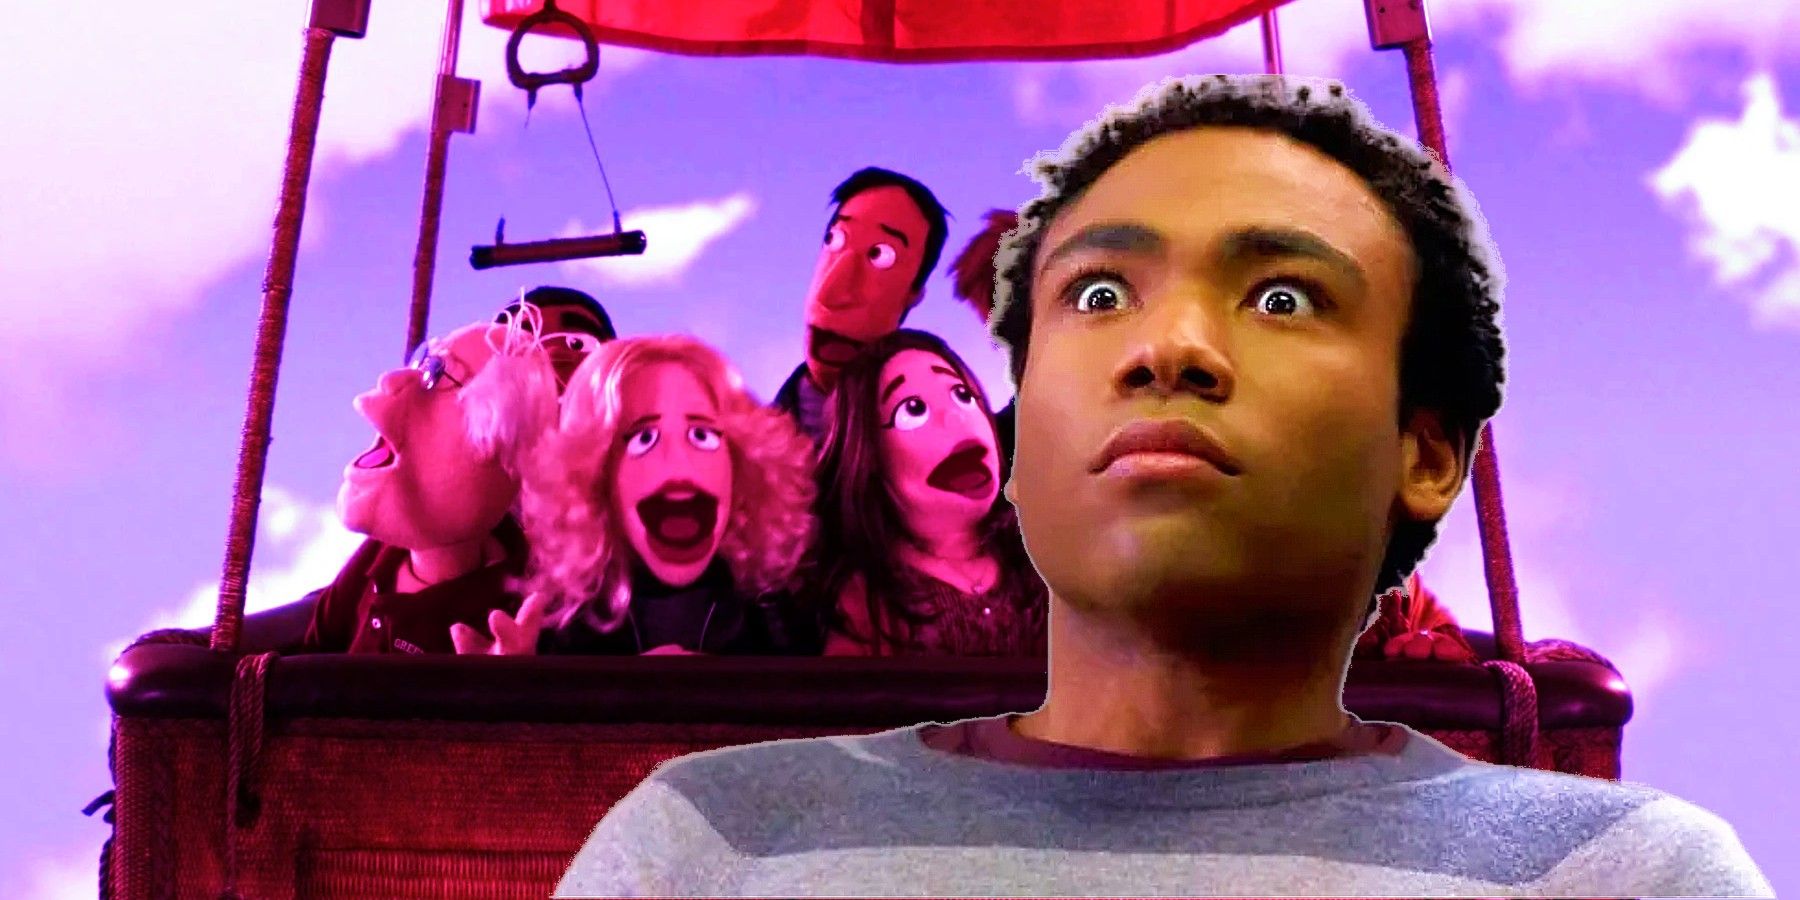 Custom image of Donald Glover and the puppet episode of Community